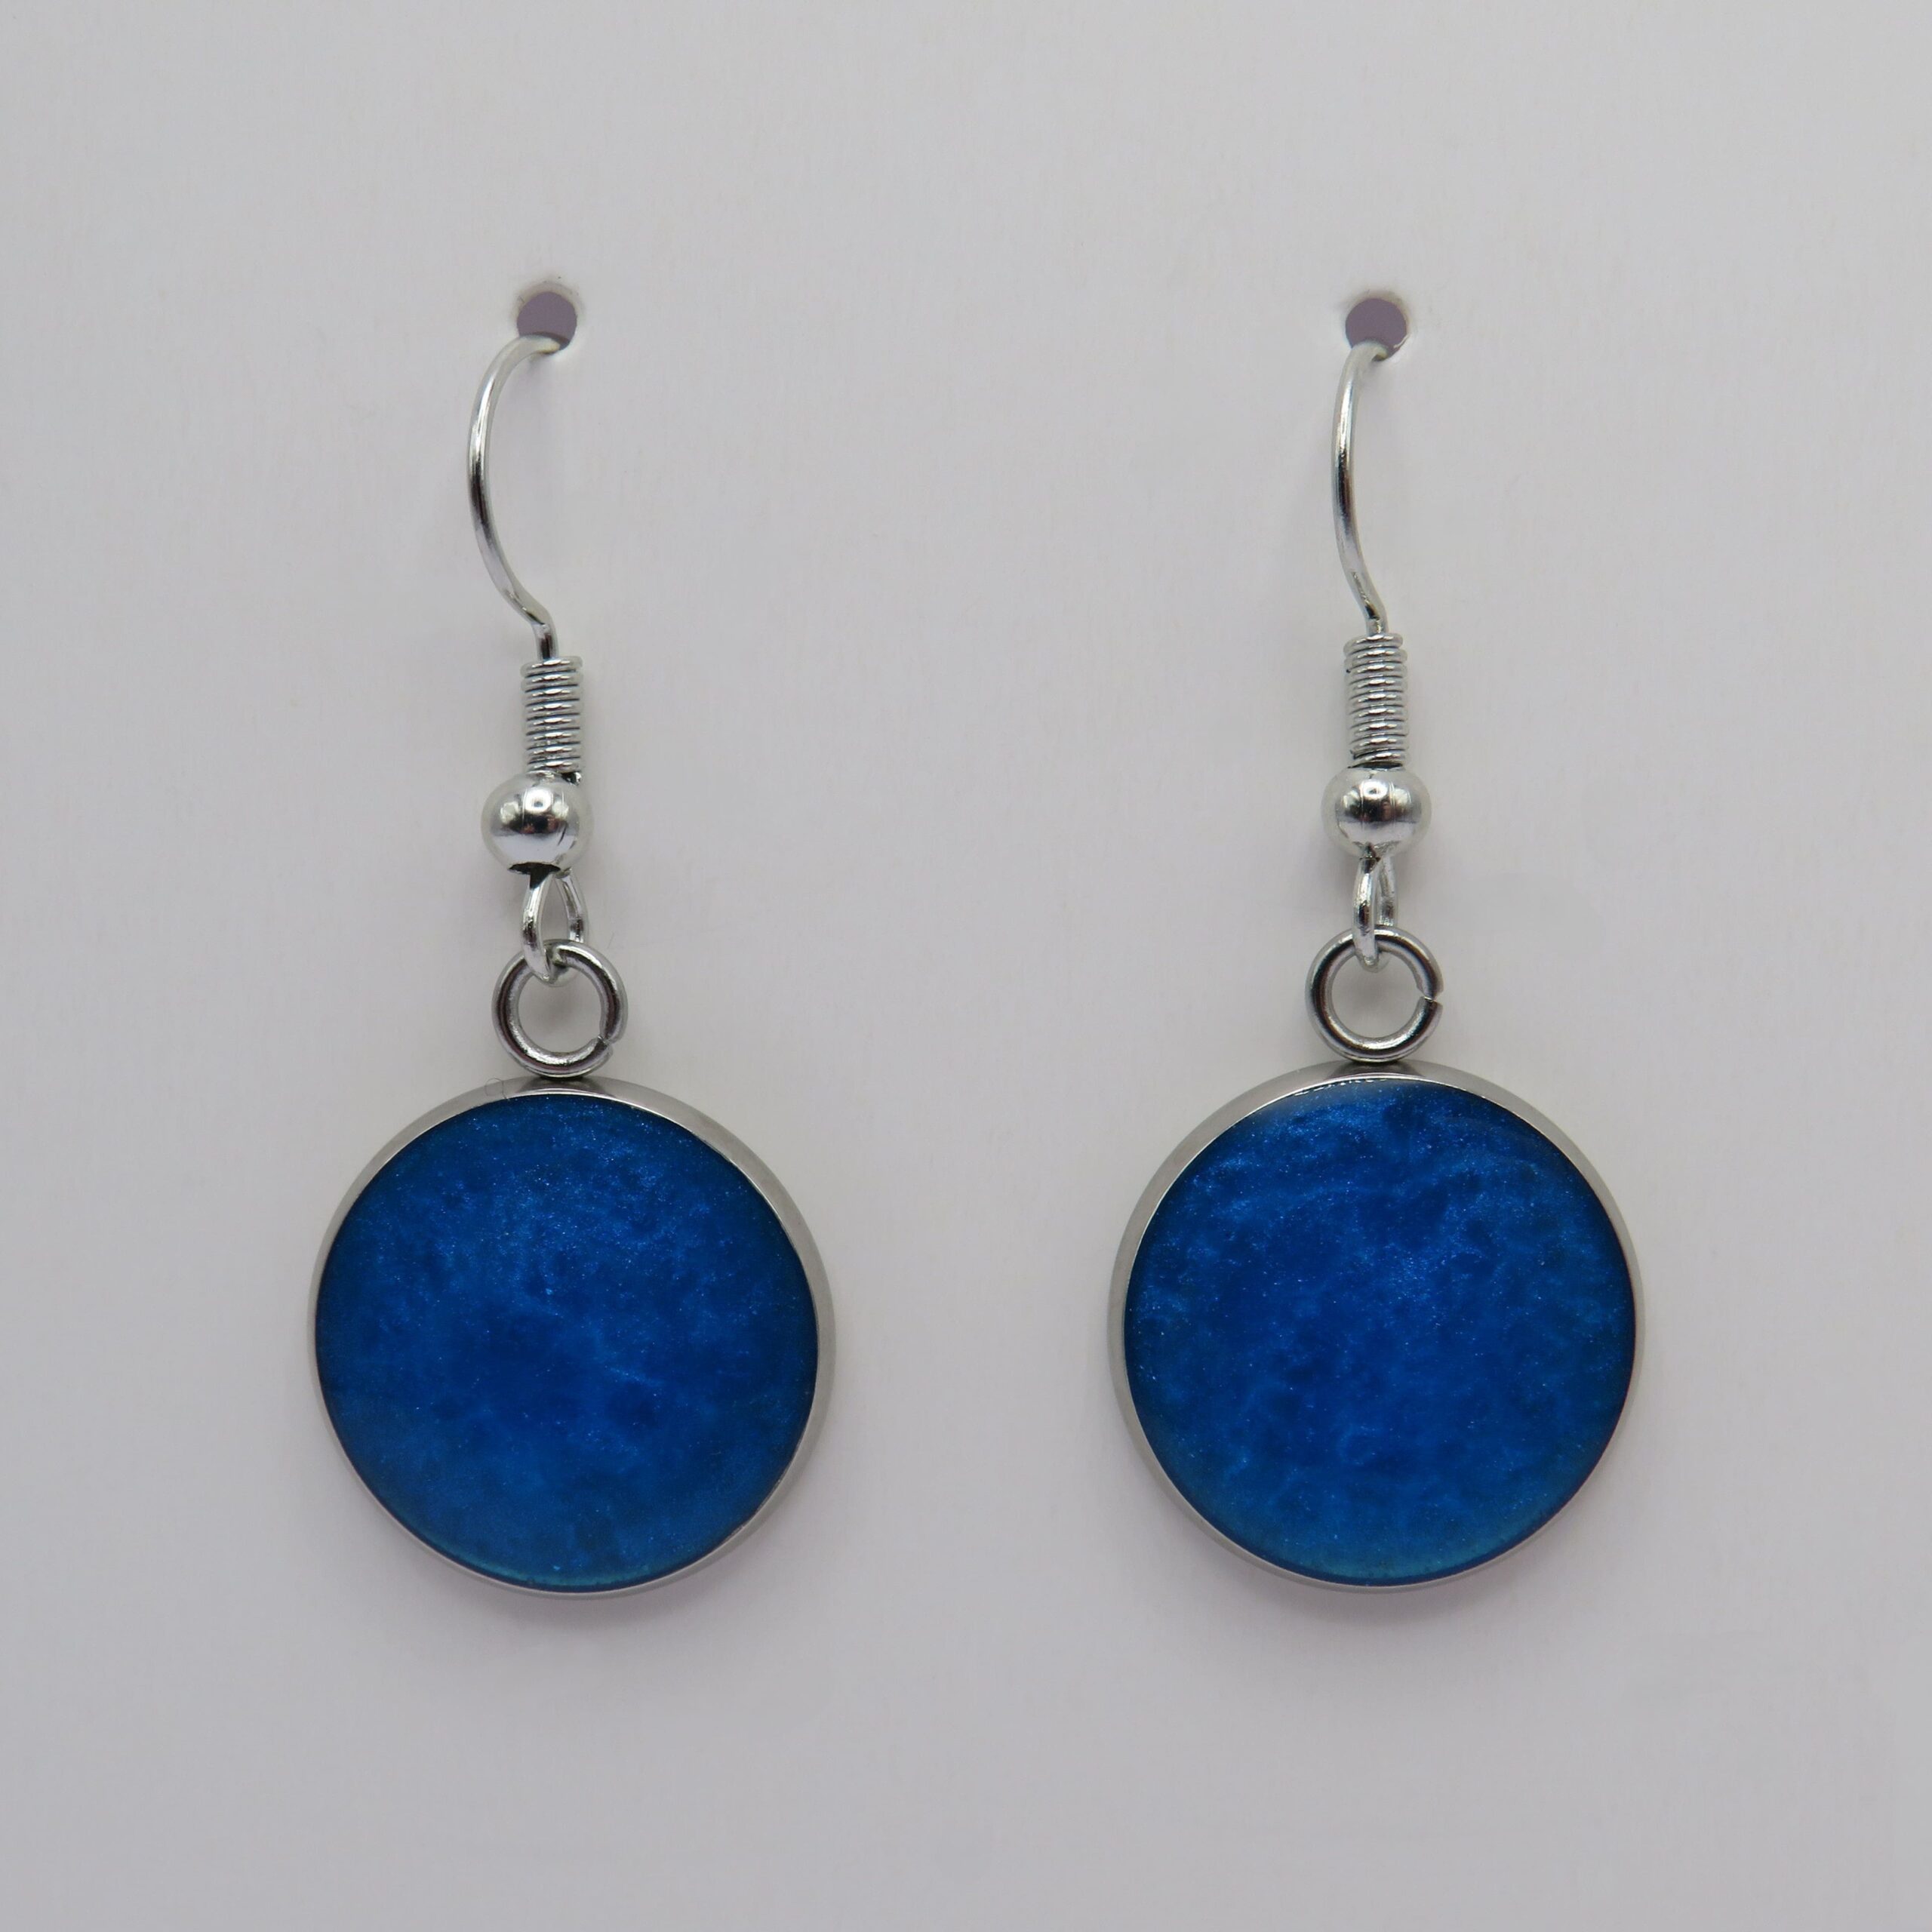 Stainless Steel Blue Round Cabochon Drop Earrings